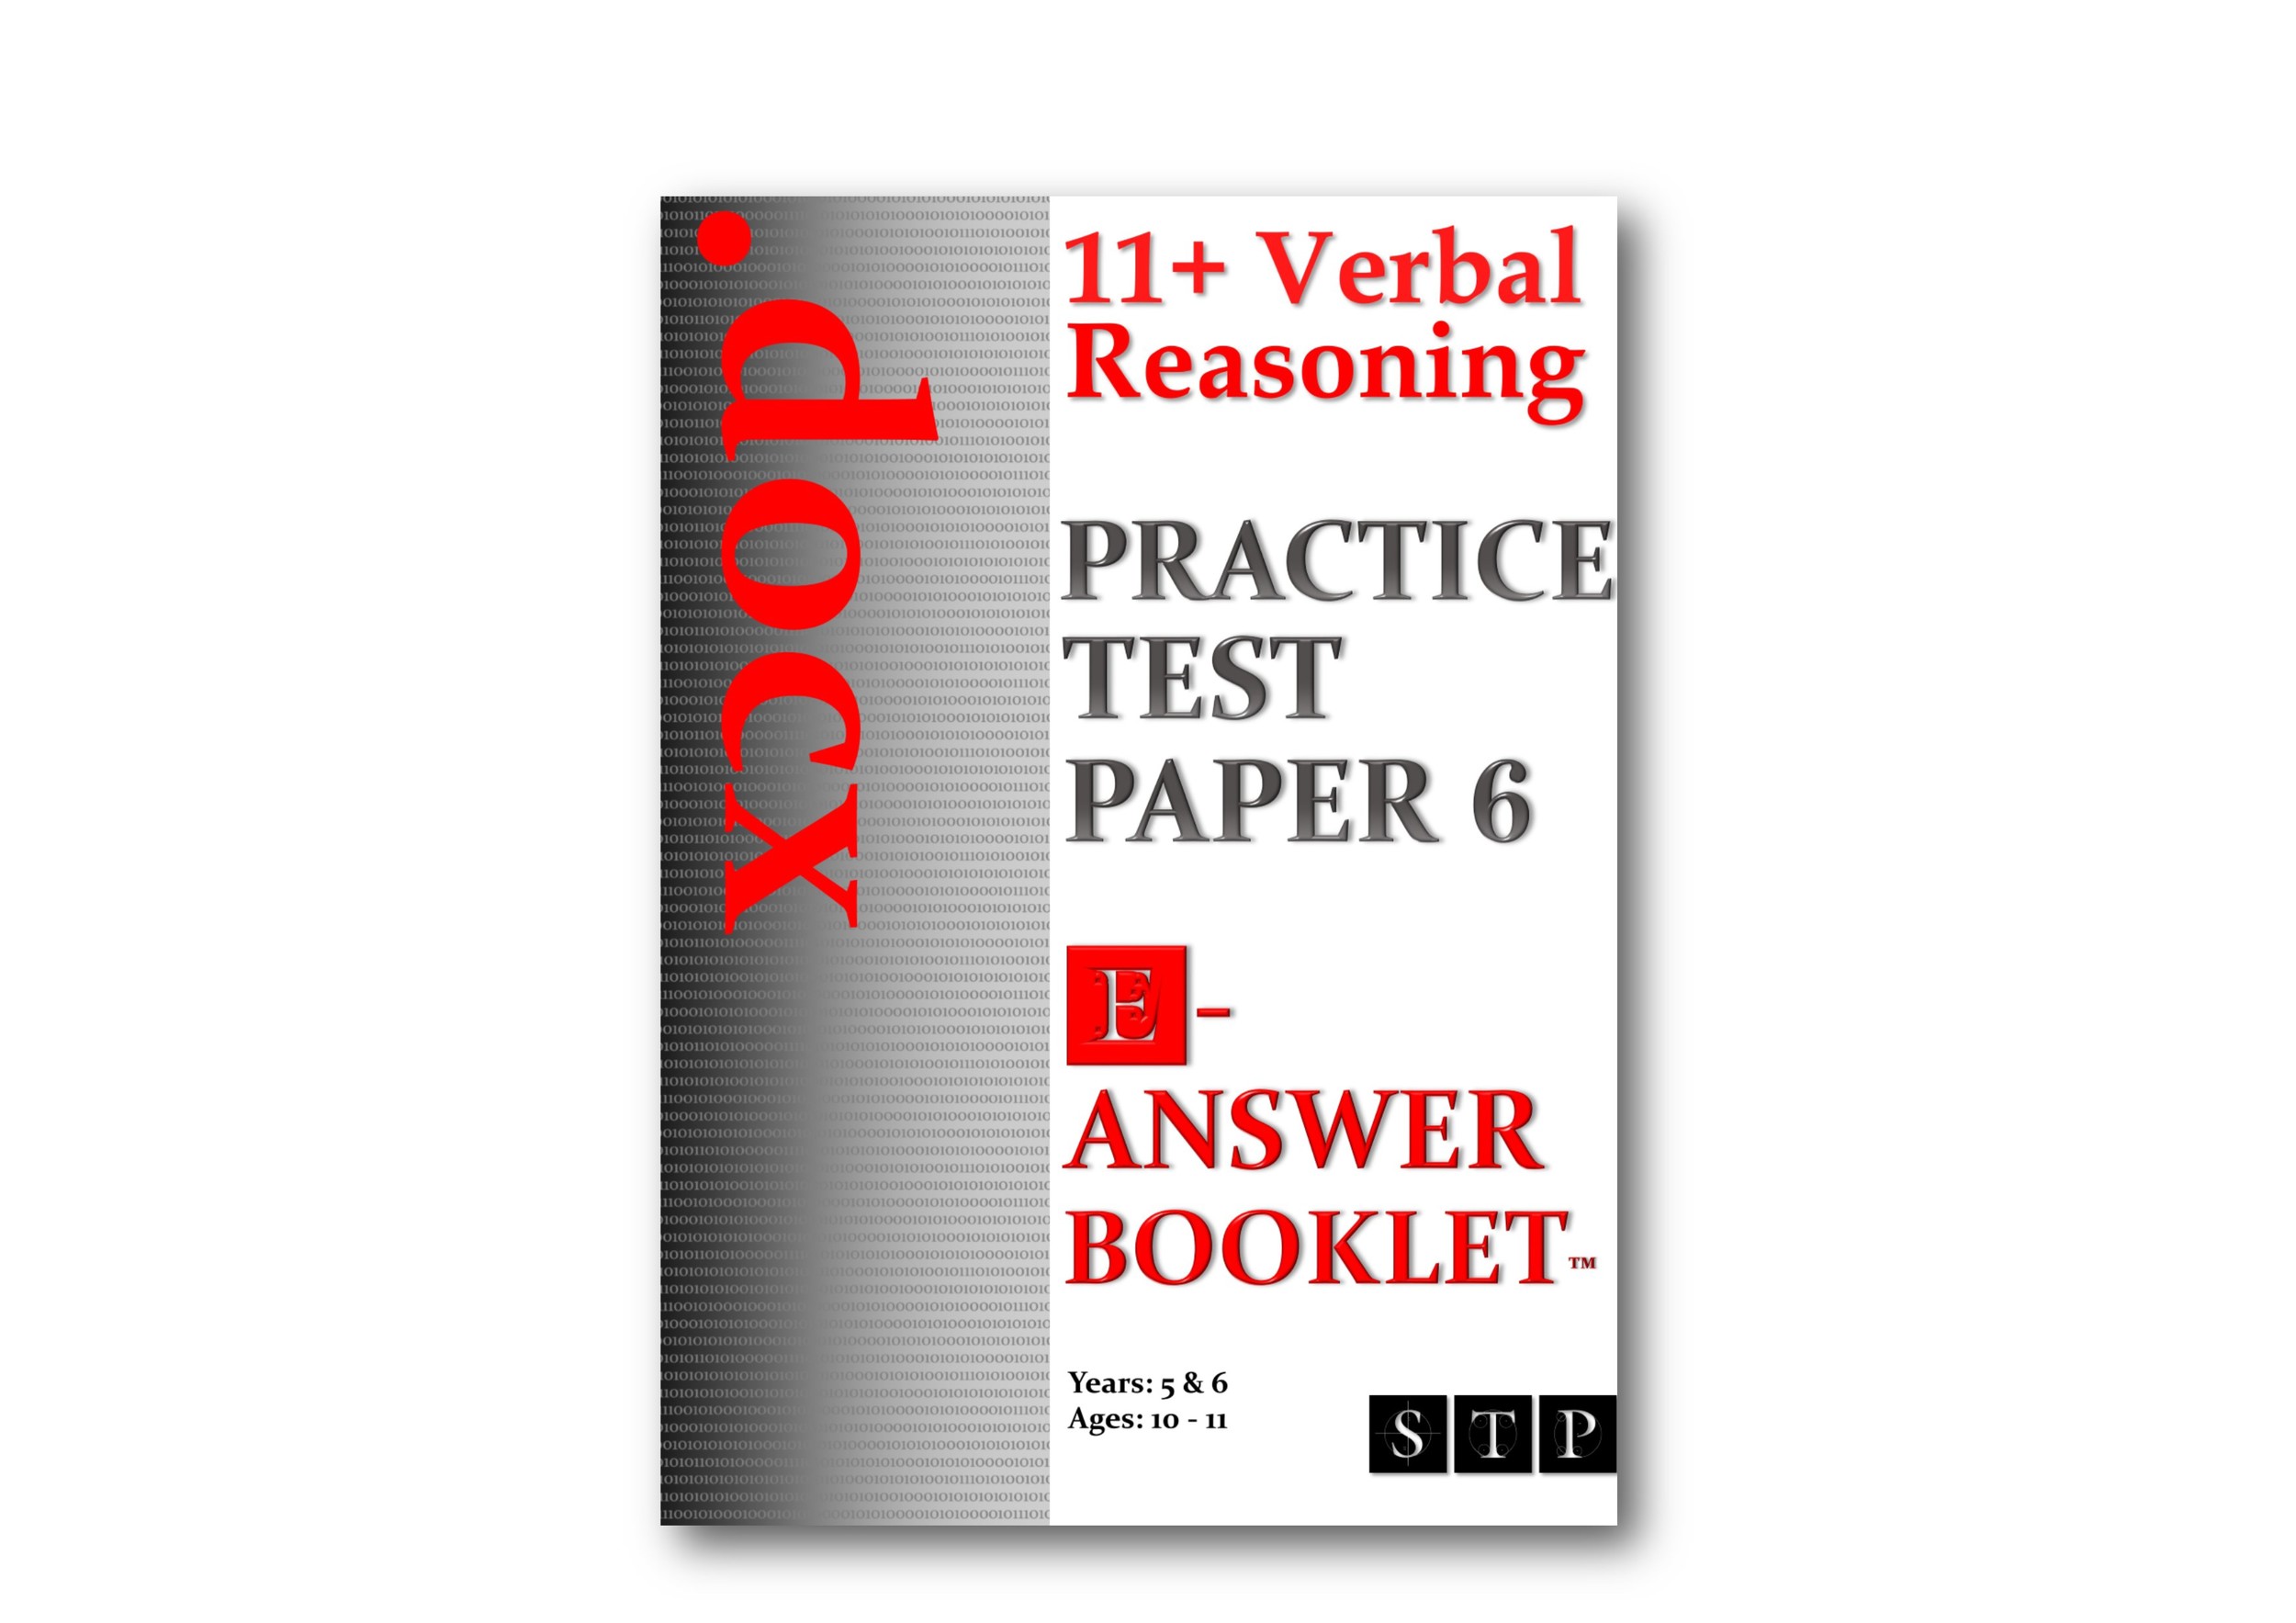 11+ Verbal Reasoning Practice Test Paper 6 (E-Answer Booklet).jpg